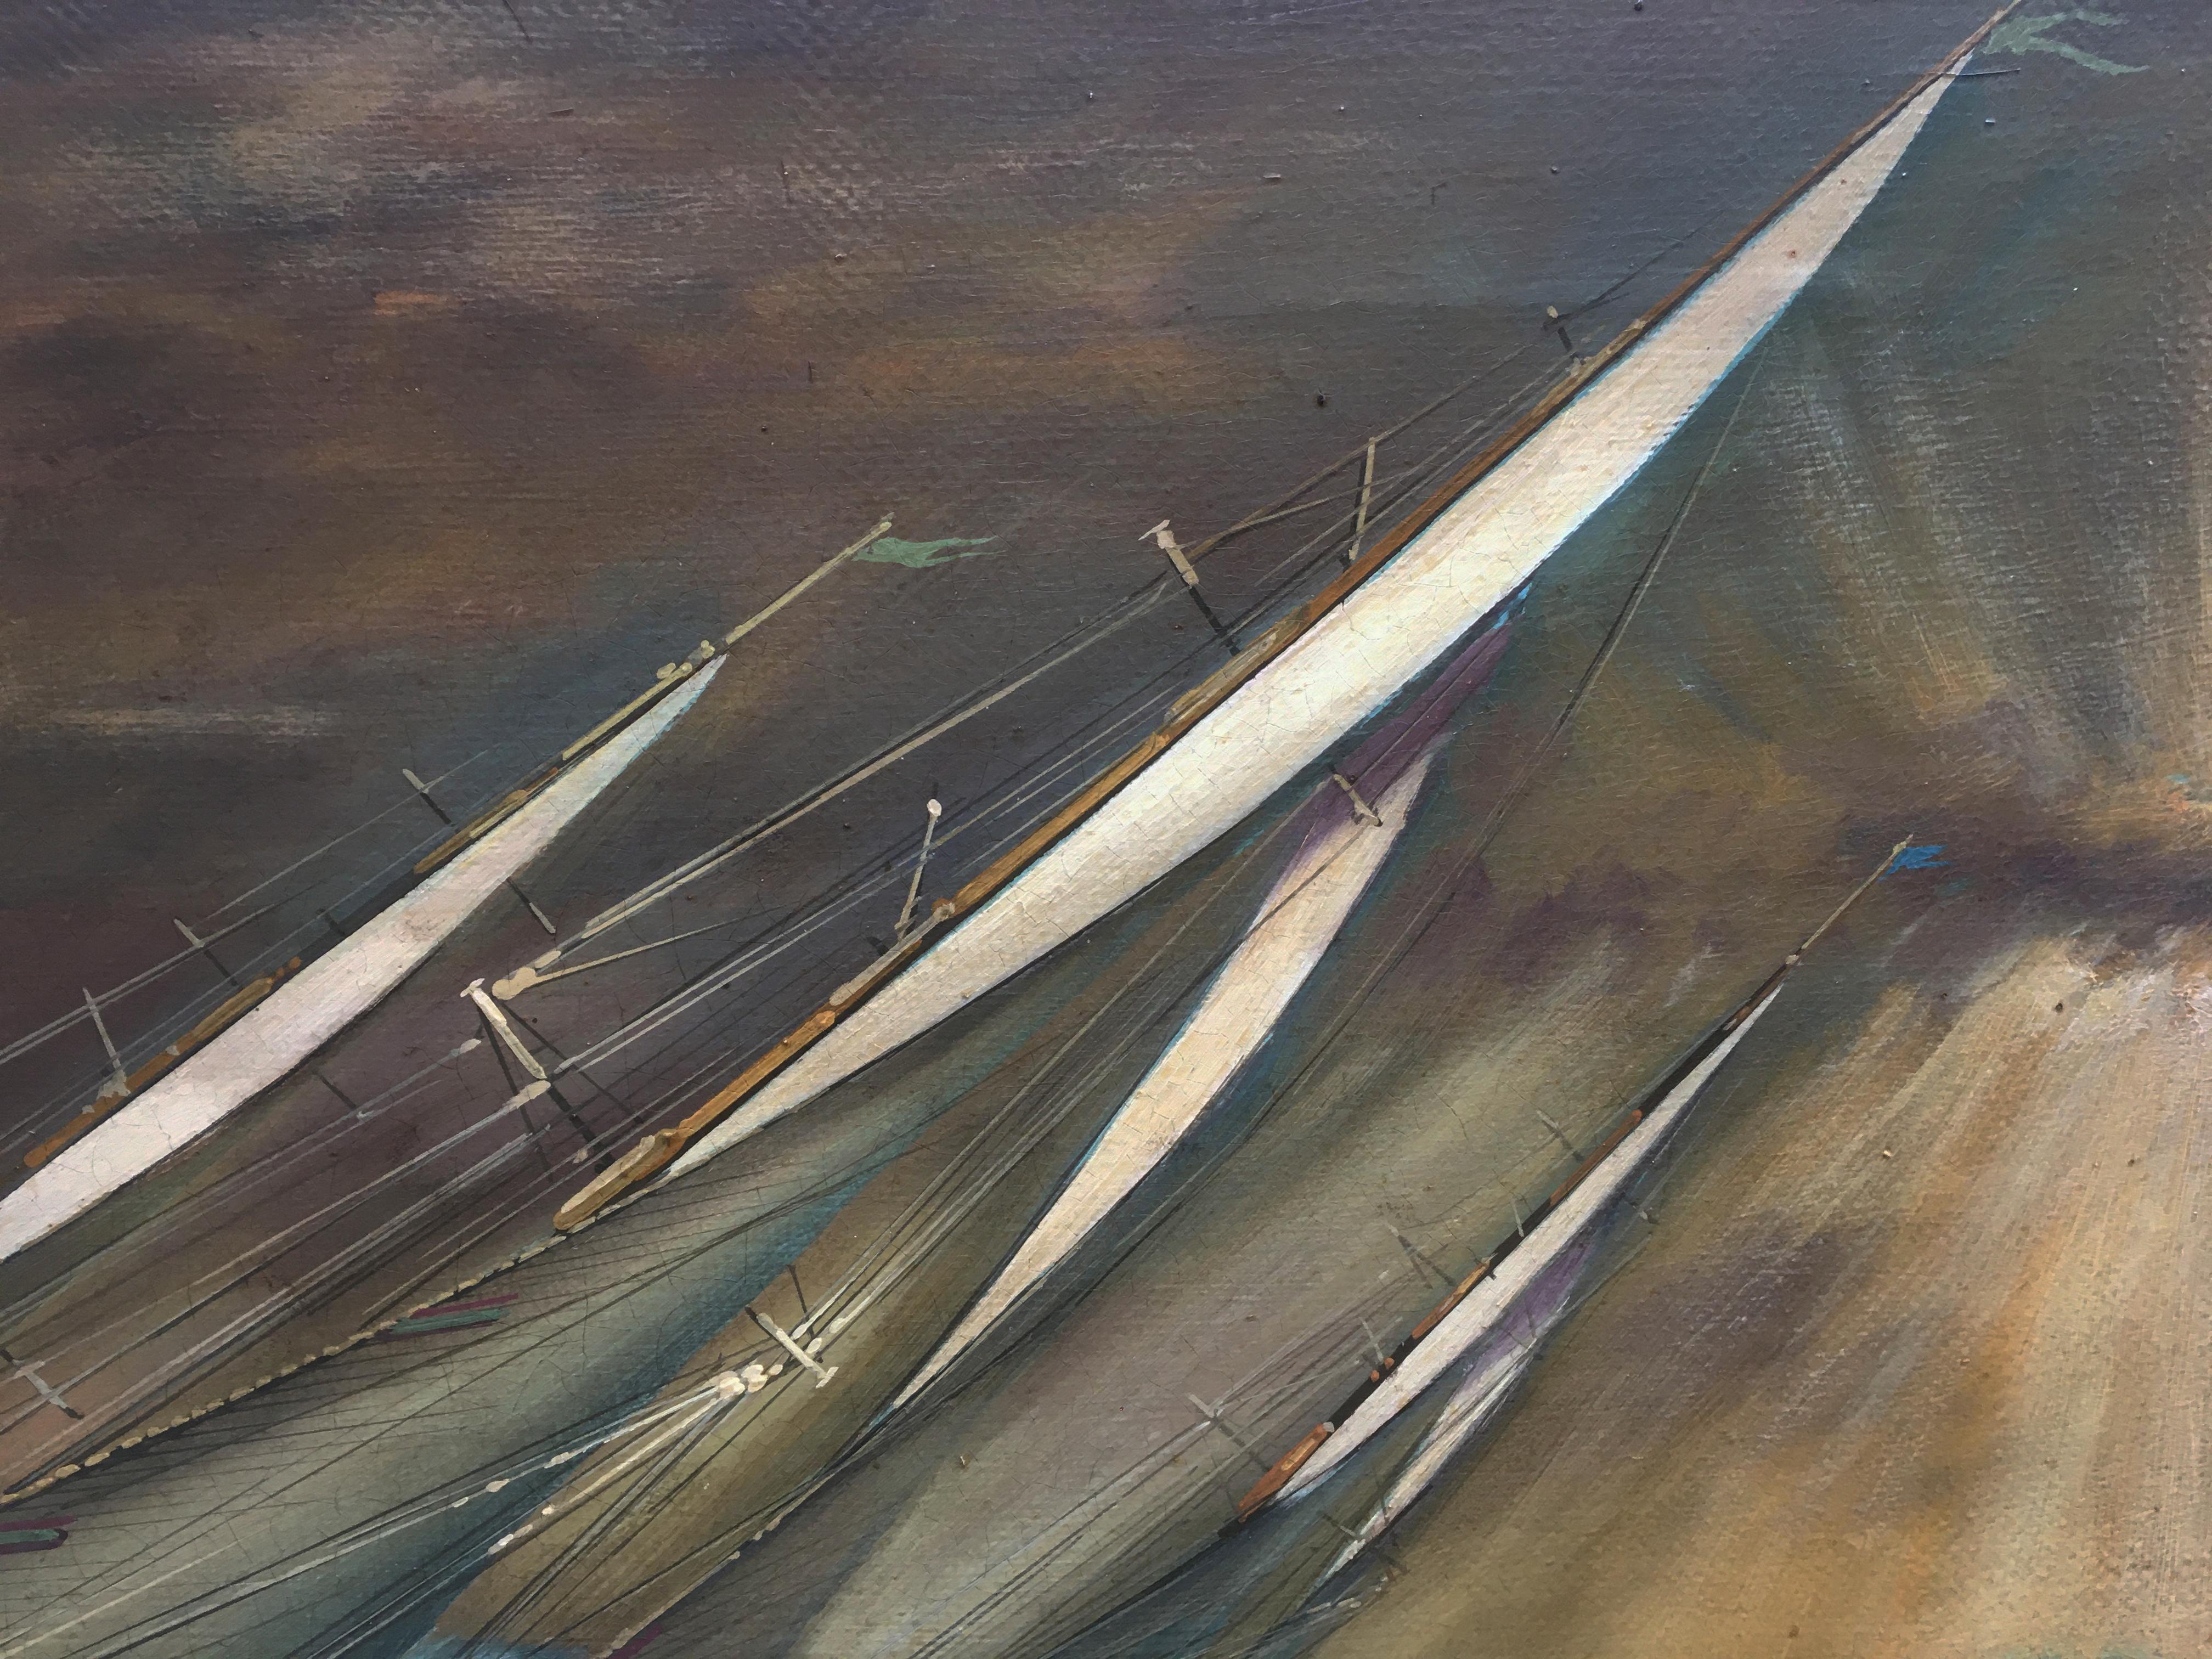 Regatta in the gulf - John Stevens Italia 2006 - Oil on canvas cm.40x80.
Using thin washes of oil paint, John Stevens slowly builds up his highly detailed paintings of scenes of naval battles and rolling sails.
He took inspiration for his paintings